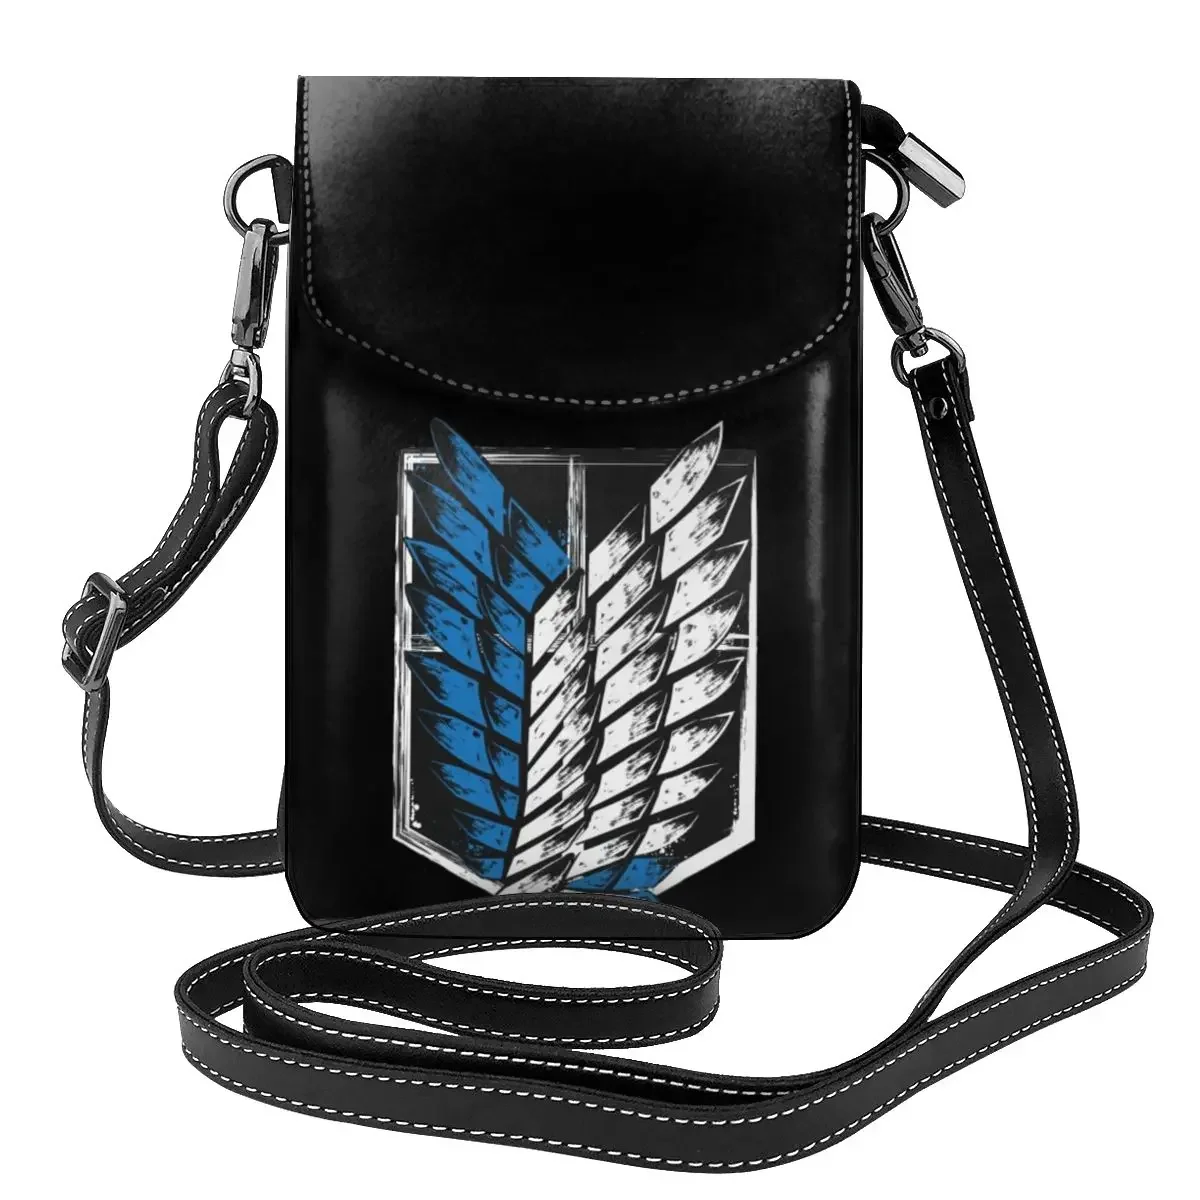 

AOT Wings Of Freedom Shoulder Bag Attack on Titan Work Leather Women Bags Woman Fashion Vintage Purse